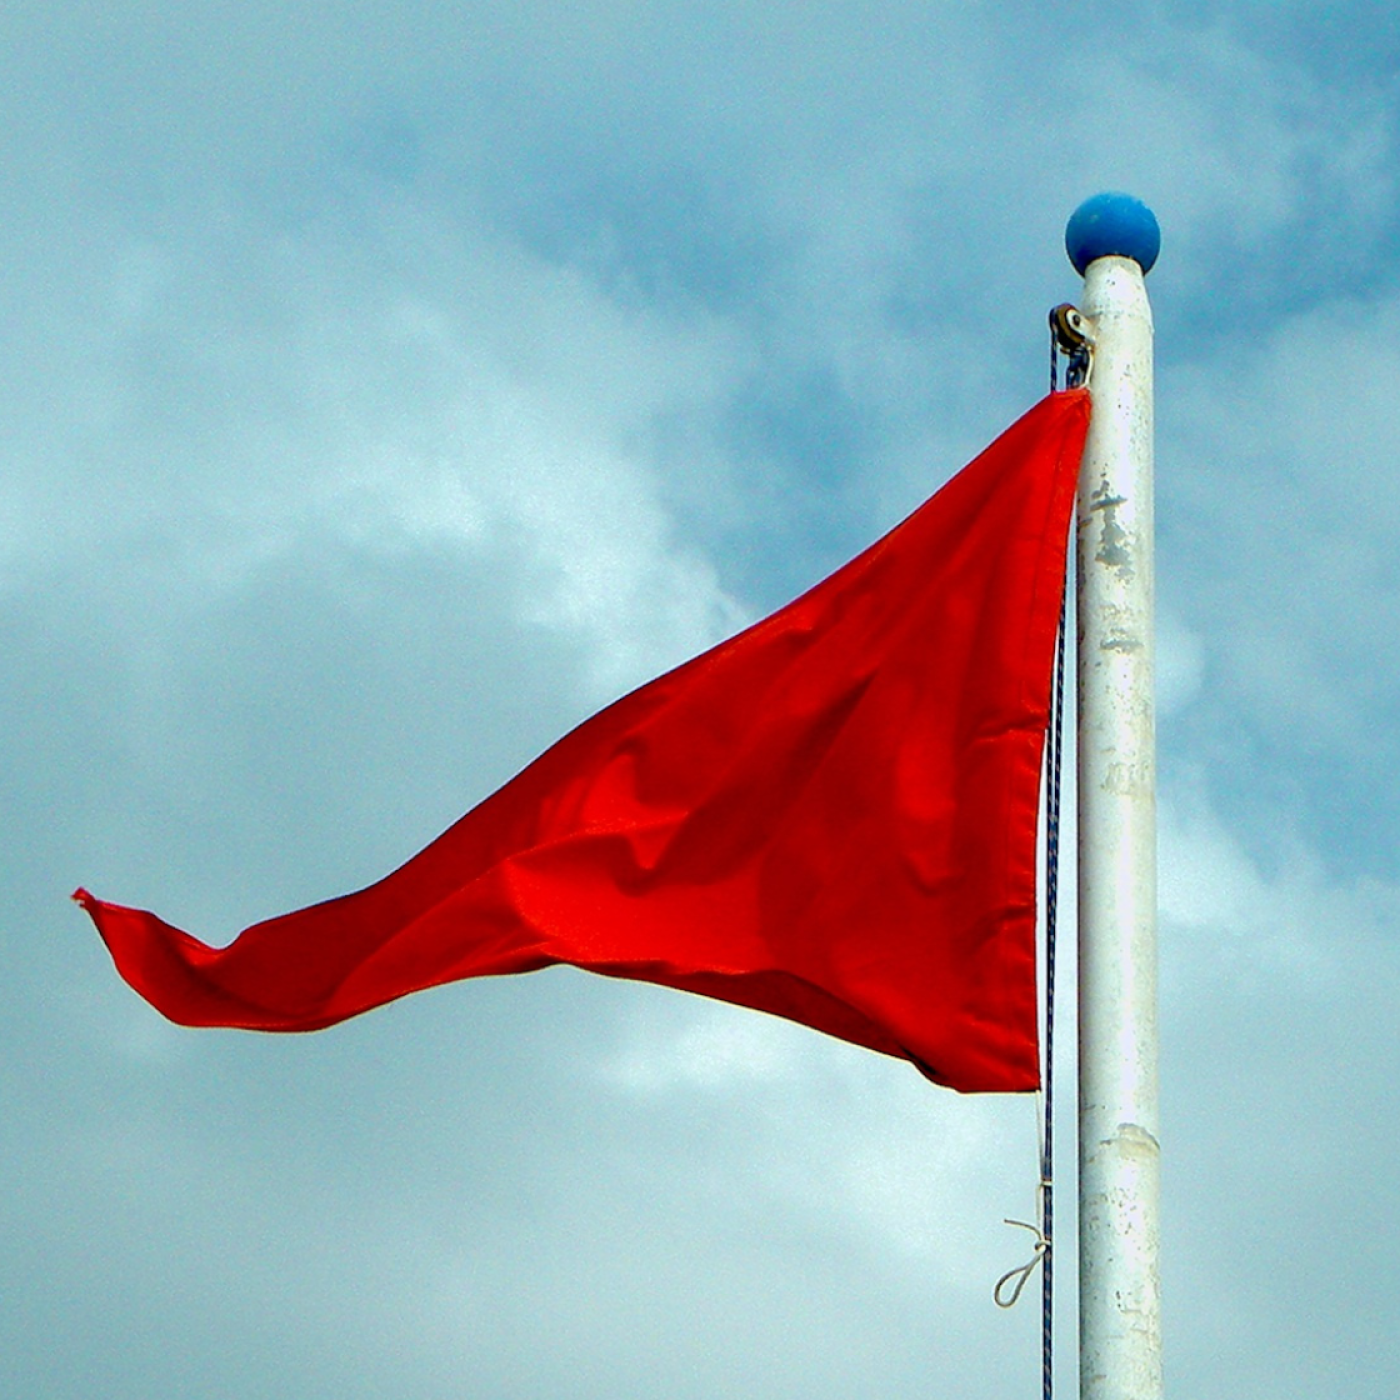 red flag on cloudy background.